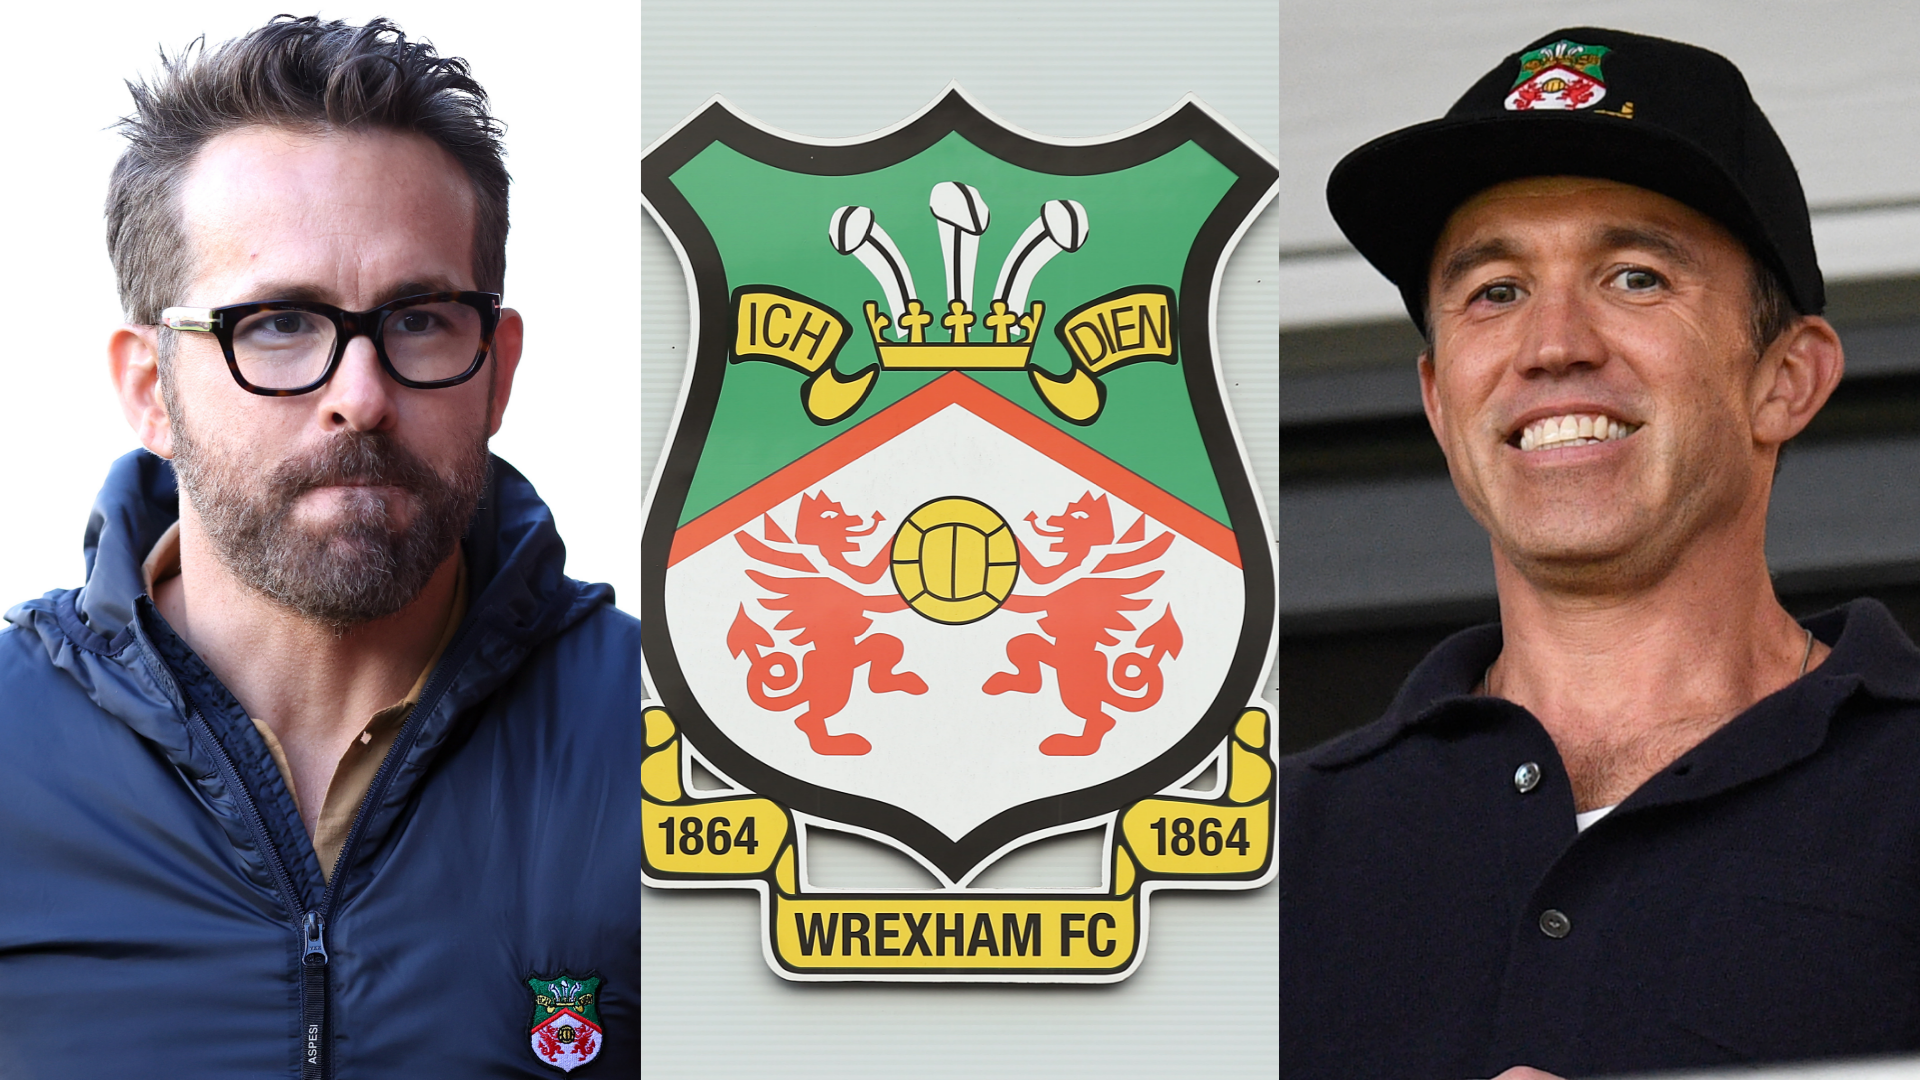 Documentary petering out & ‘bigger than Leeds’ mentality – Ryan Reynolds & Rob McElhenney see fellow EFL owner tell them why Wrexham have become ‘nauseating’